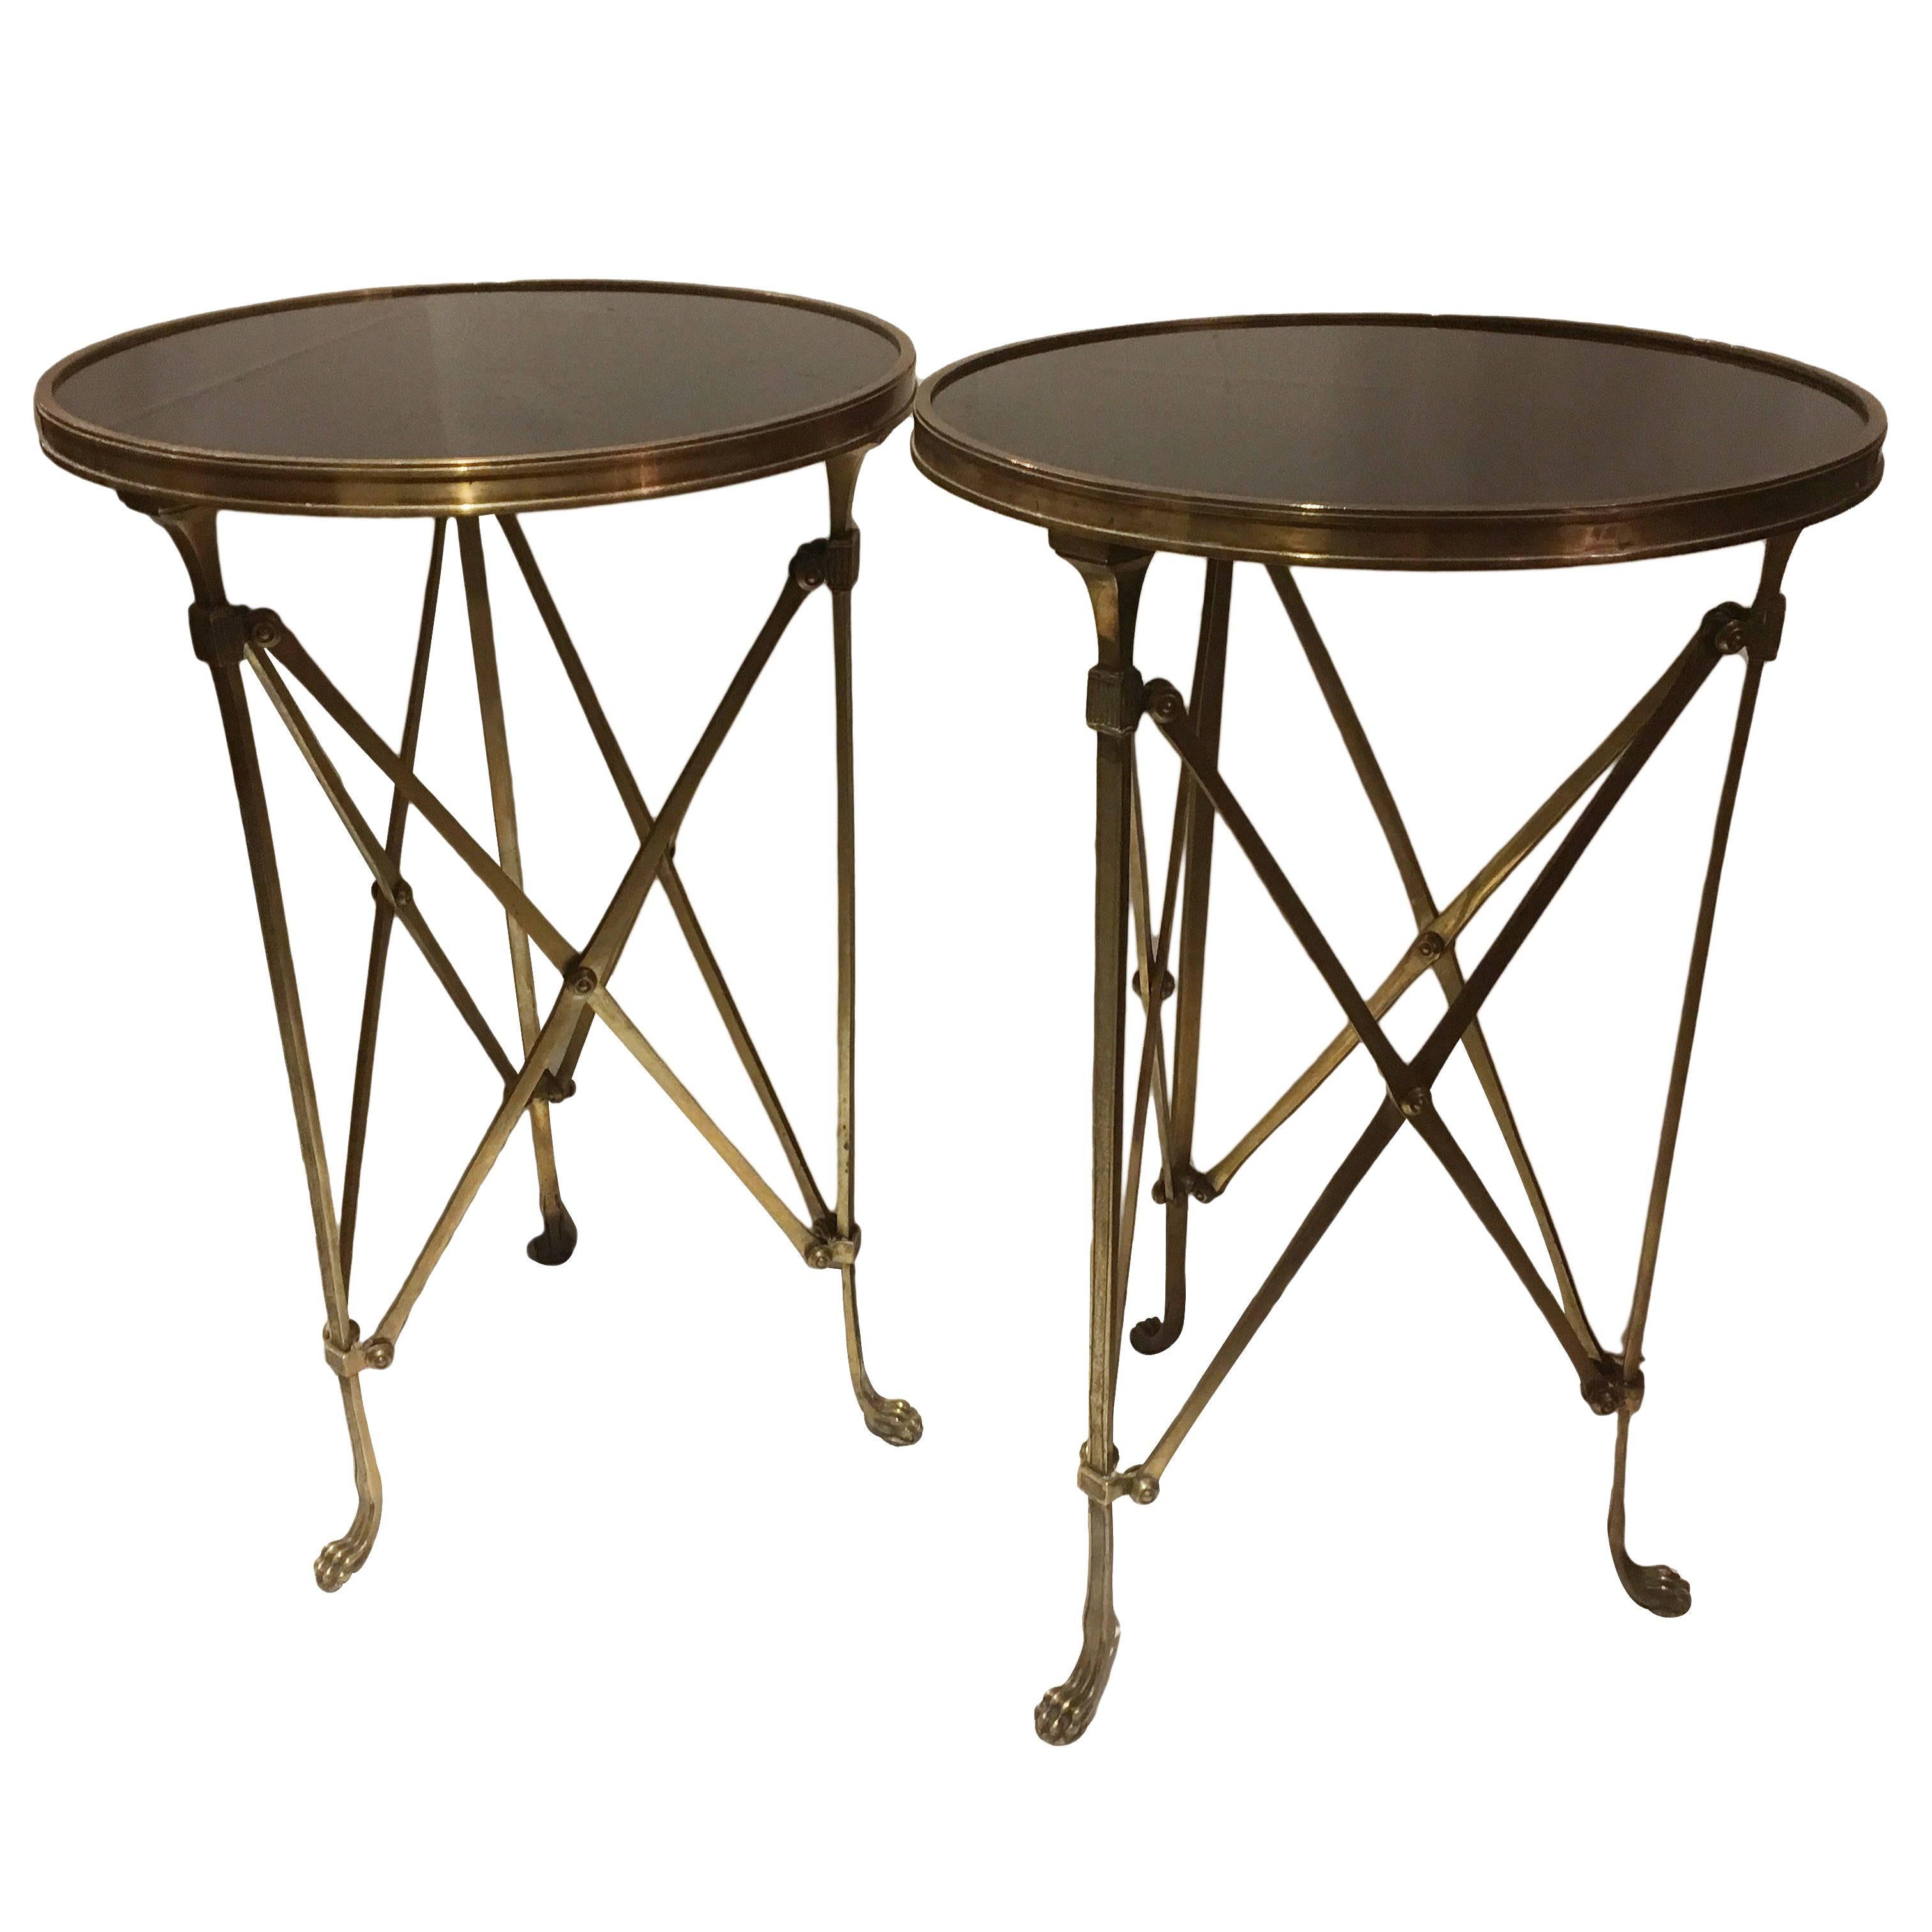 Pair of Gueridon Bronze Tables